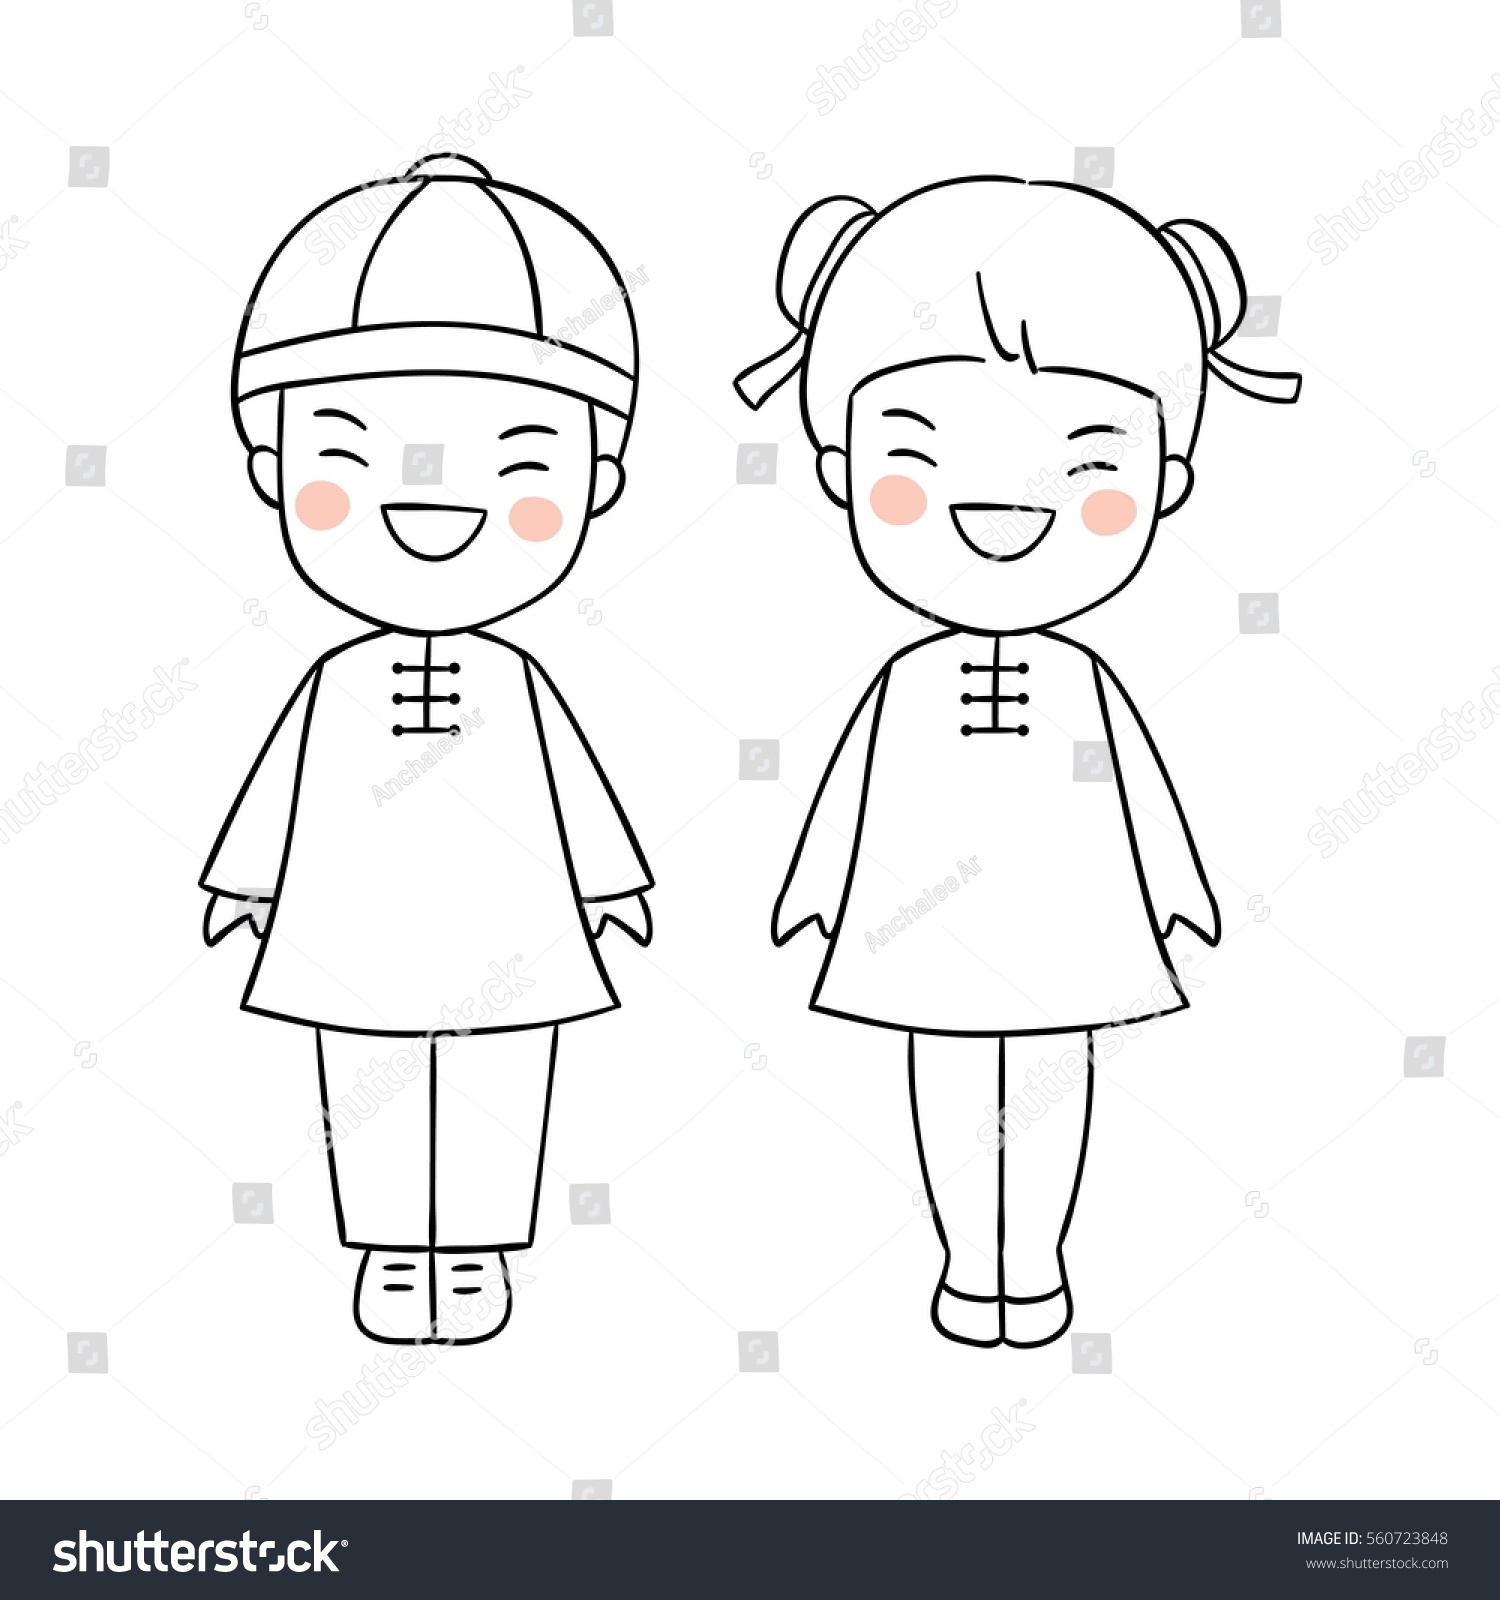 Vector Design Outline Character Cute Boy Stock Vector (Royalty Free ...